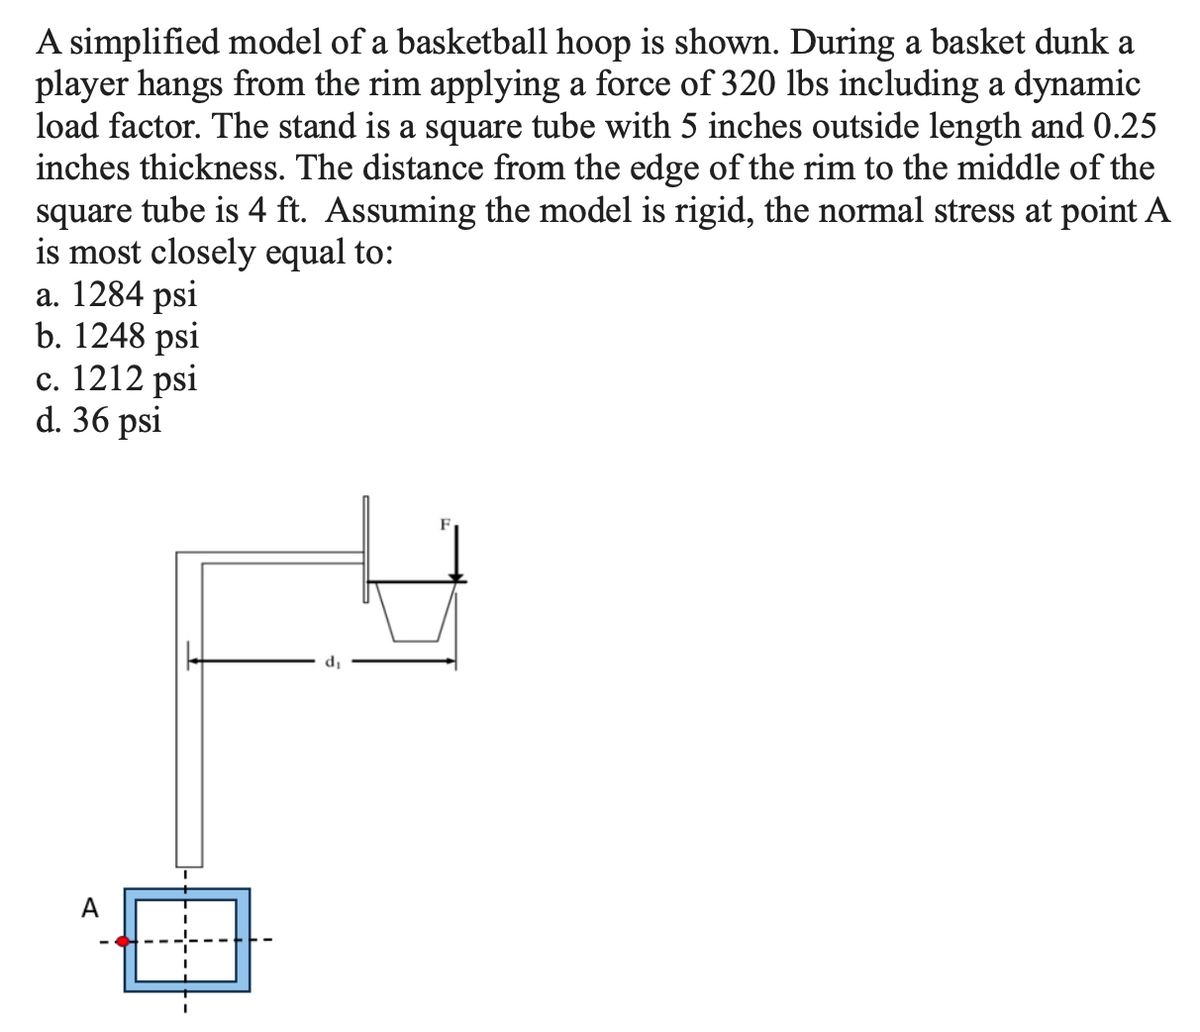 A simplified model of a basketball hoop is shown. During a basket dunk a
player hangs from the rim applying a force of 320 lbs including a dynamic
load factor. The stand is a square tube with 5 inches outside length and 0.25
inches thickness. The distance from the edge of the rim to the middle of the
square tube is 4 ft. Assuming the model is rigid, the normal stress at point A
is most closely equal to:
a. 1284 psi
b. 1248 psi
c. 1212 psi
d. 36 psi
A